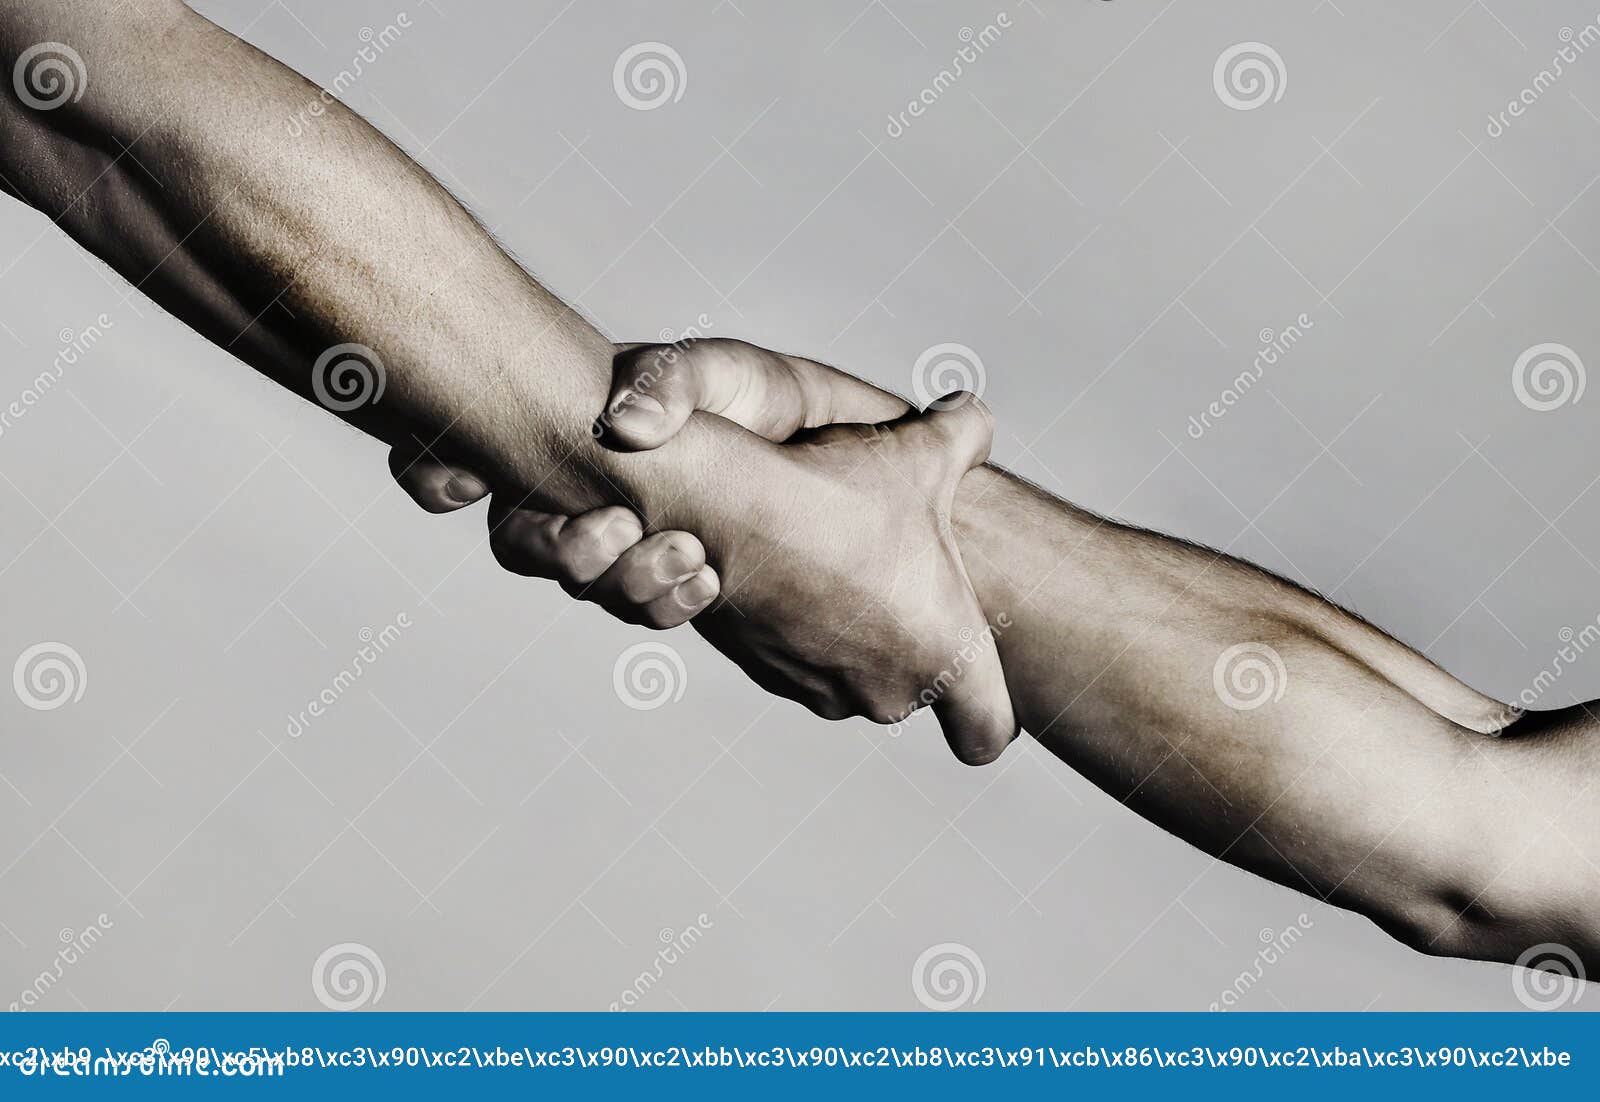 rescue, helping gesture or hands. strong hold. two hands, helping hand of a friend. handshake, arms, friendship